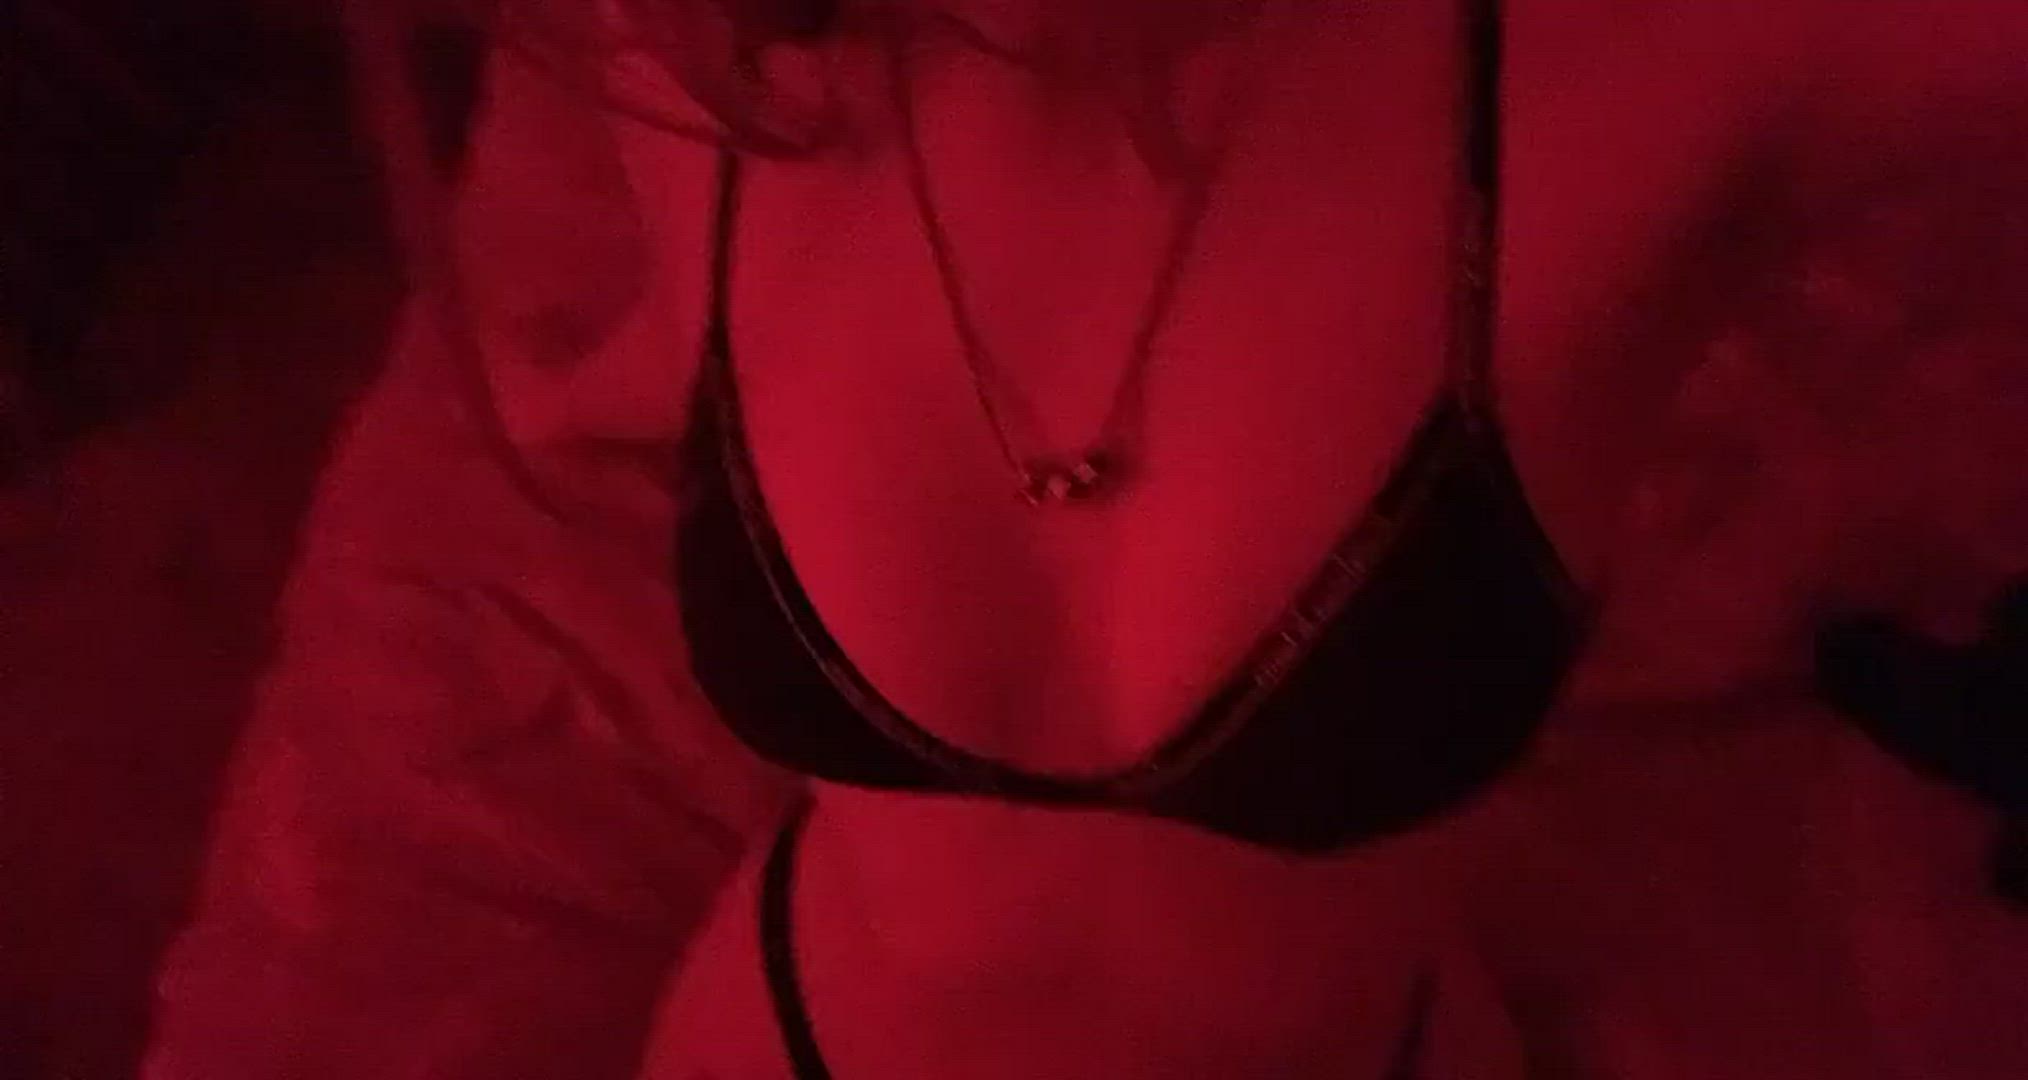 Amateur porn video with onlyfans model sexilexi07 <strong>@sexilexij</strong>